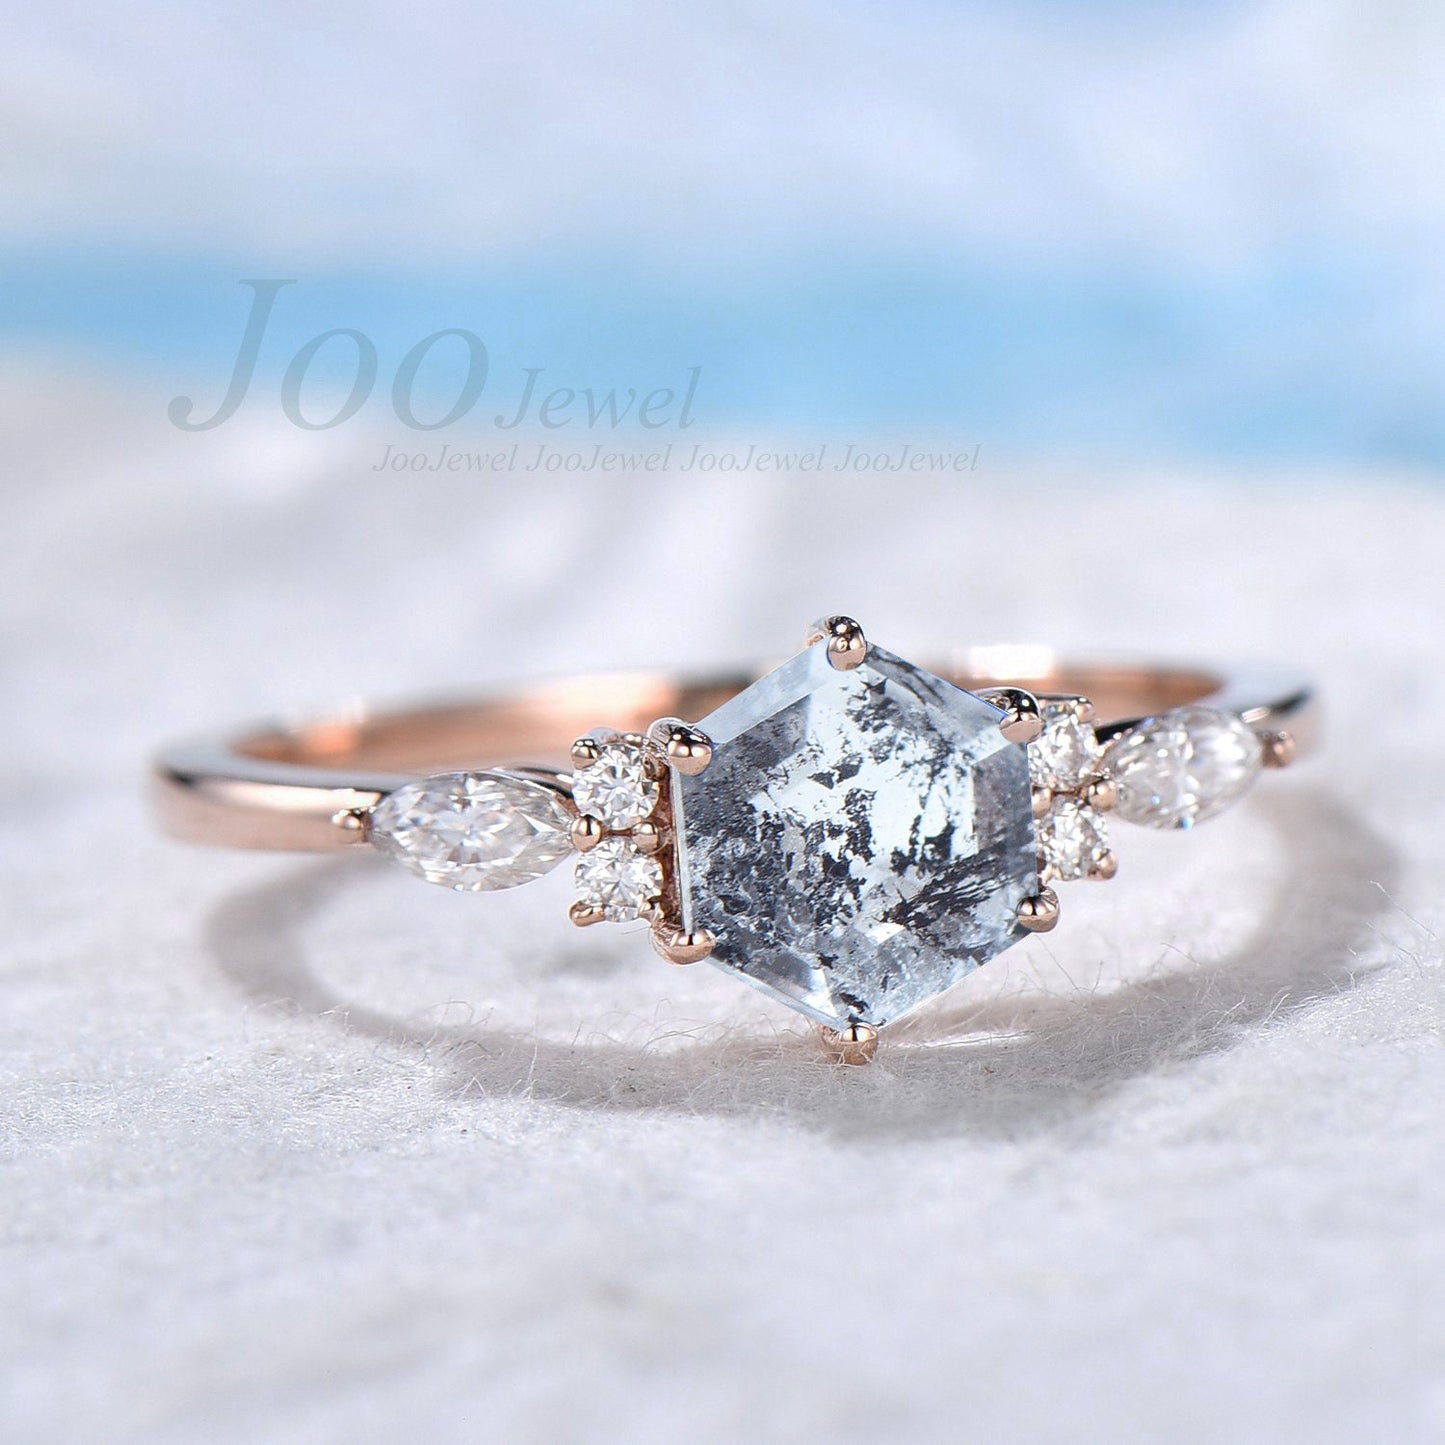 1 Carat Hexagon Cut Natural Herkimer Diamond Engagement Ring Women Vintage Sterling Silver Unique Gray Crystal Jewelry Dainty Platinum Rings